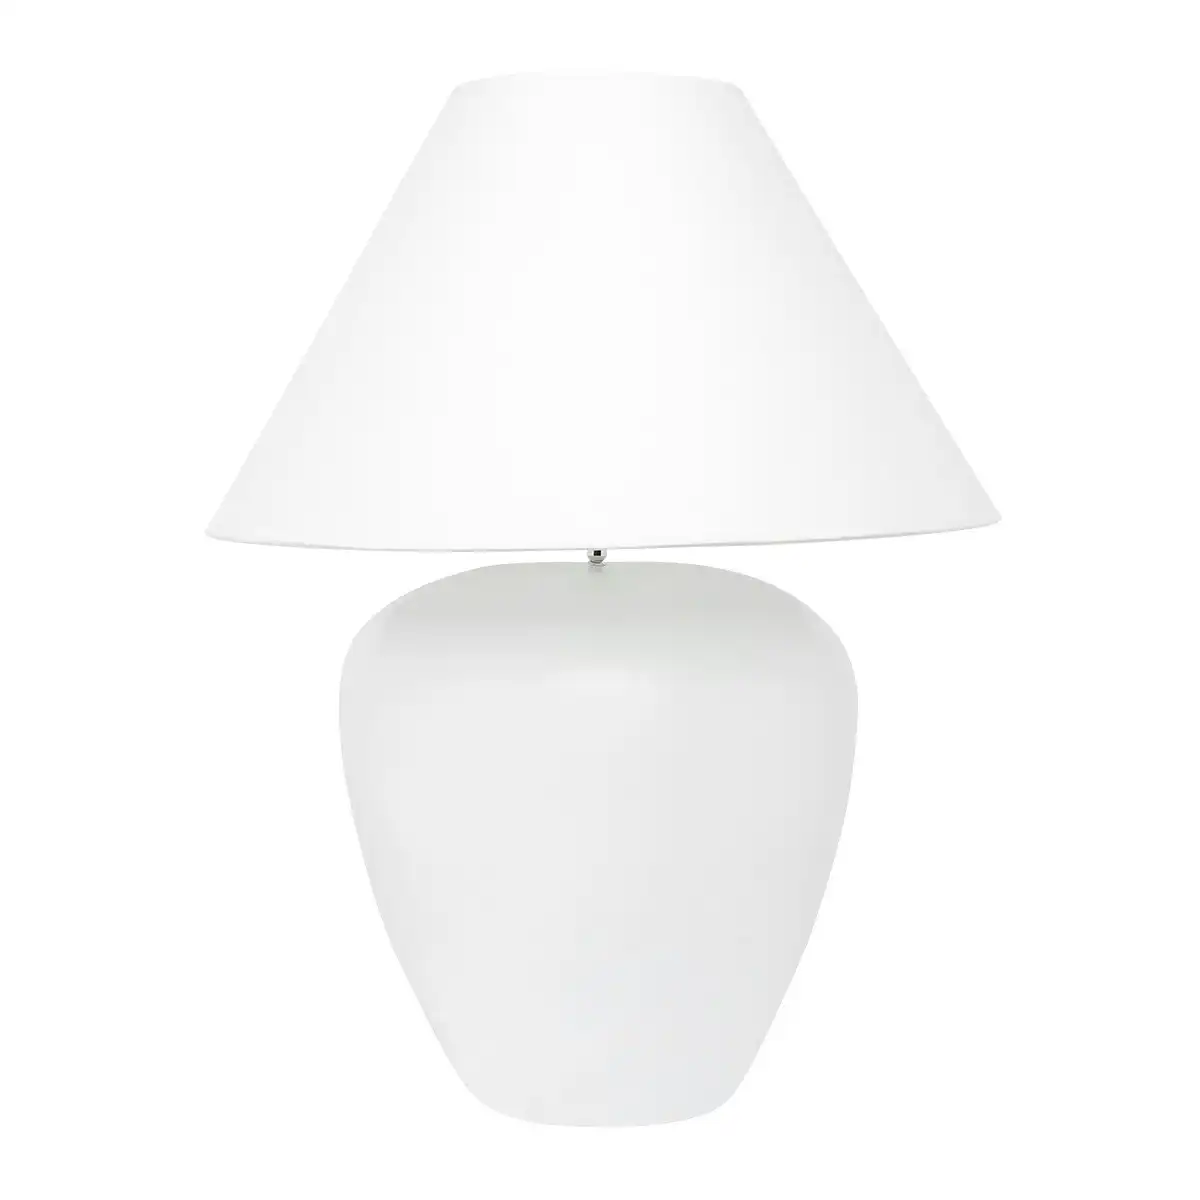 Cafe Lighting Picasso Table Lamp - White with White Shade